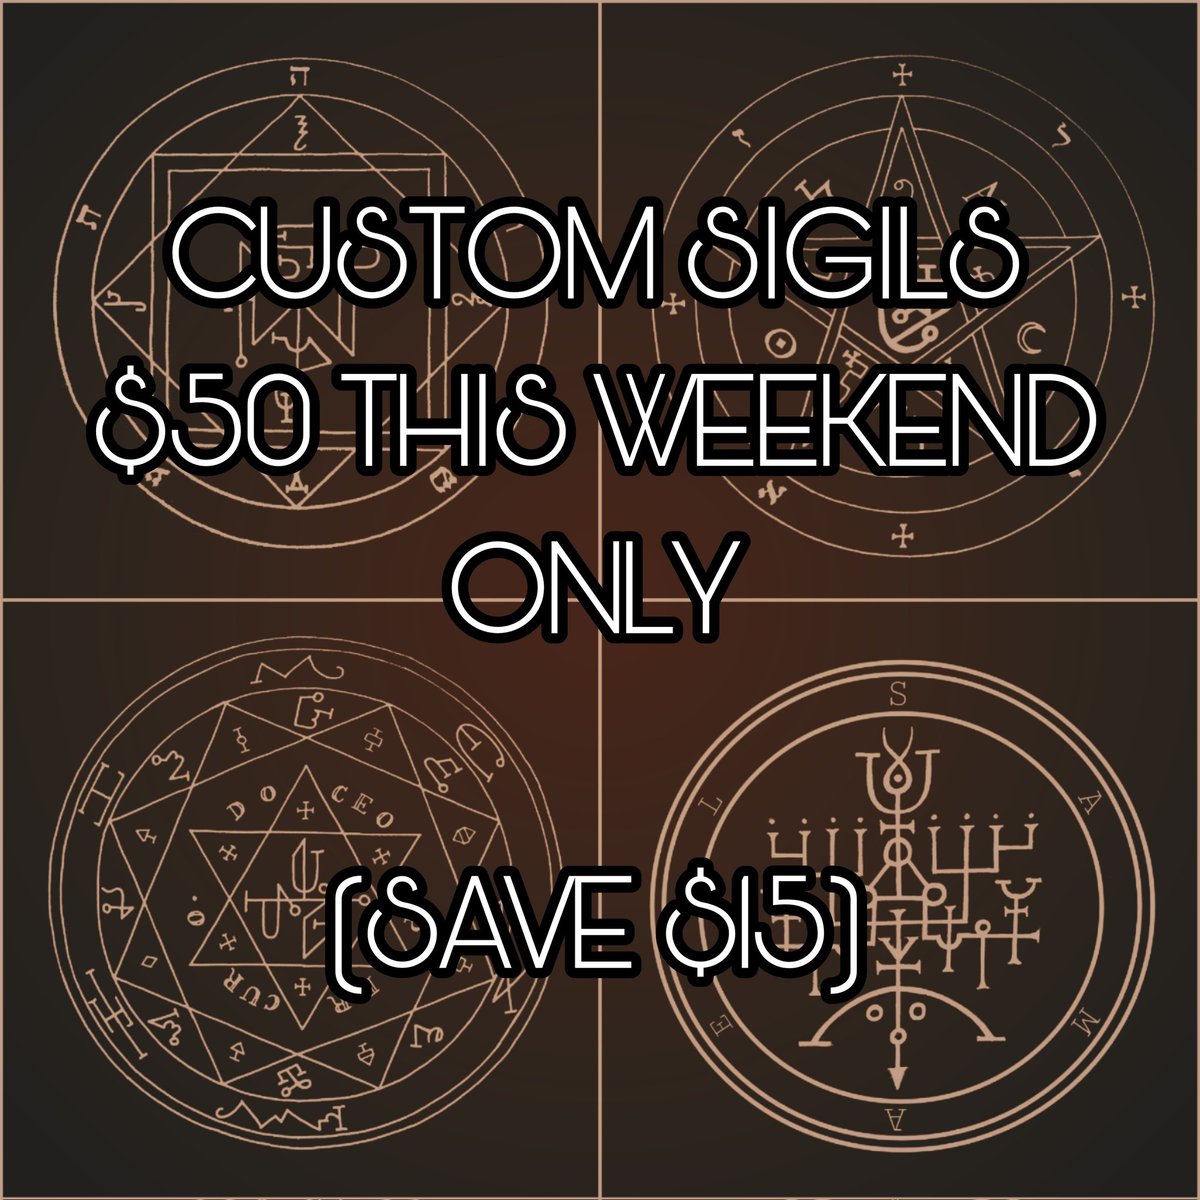 Message me for details!

#witch #witchesofinstagram #talismans #darkart #witchcraft #devil #goetia #deity #witchy #pagan #talismanmagic #magick #witchythings #occult #divination #ritual #sigilsandsymbols #witches #paranormal #mystic #satan #sigils #mythology #alchemy